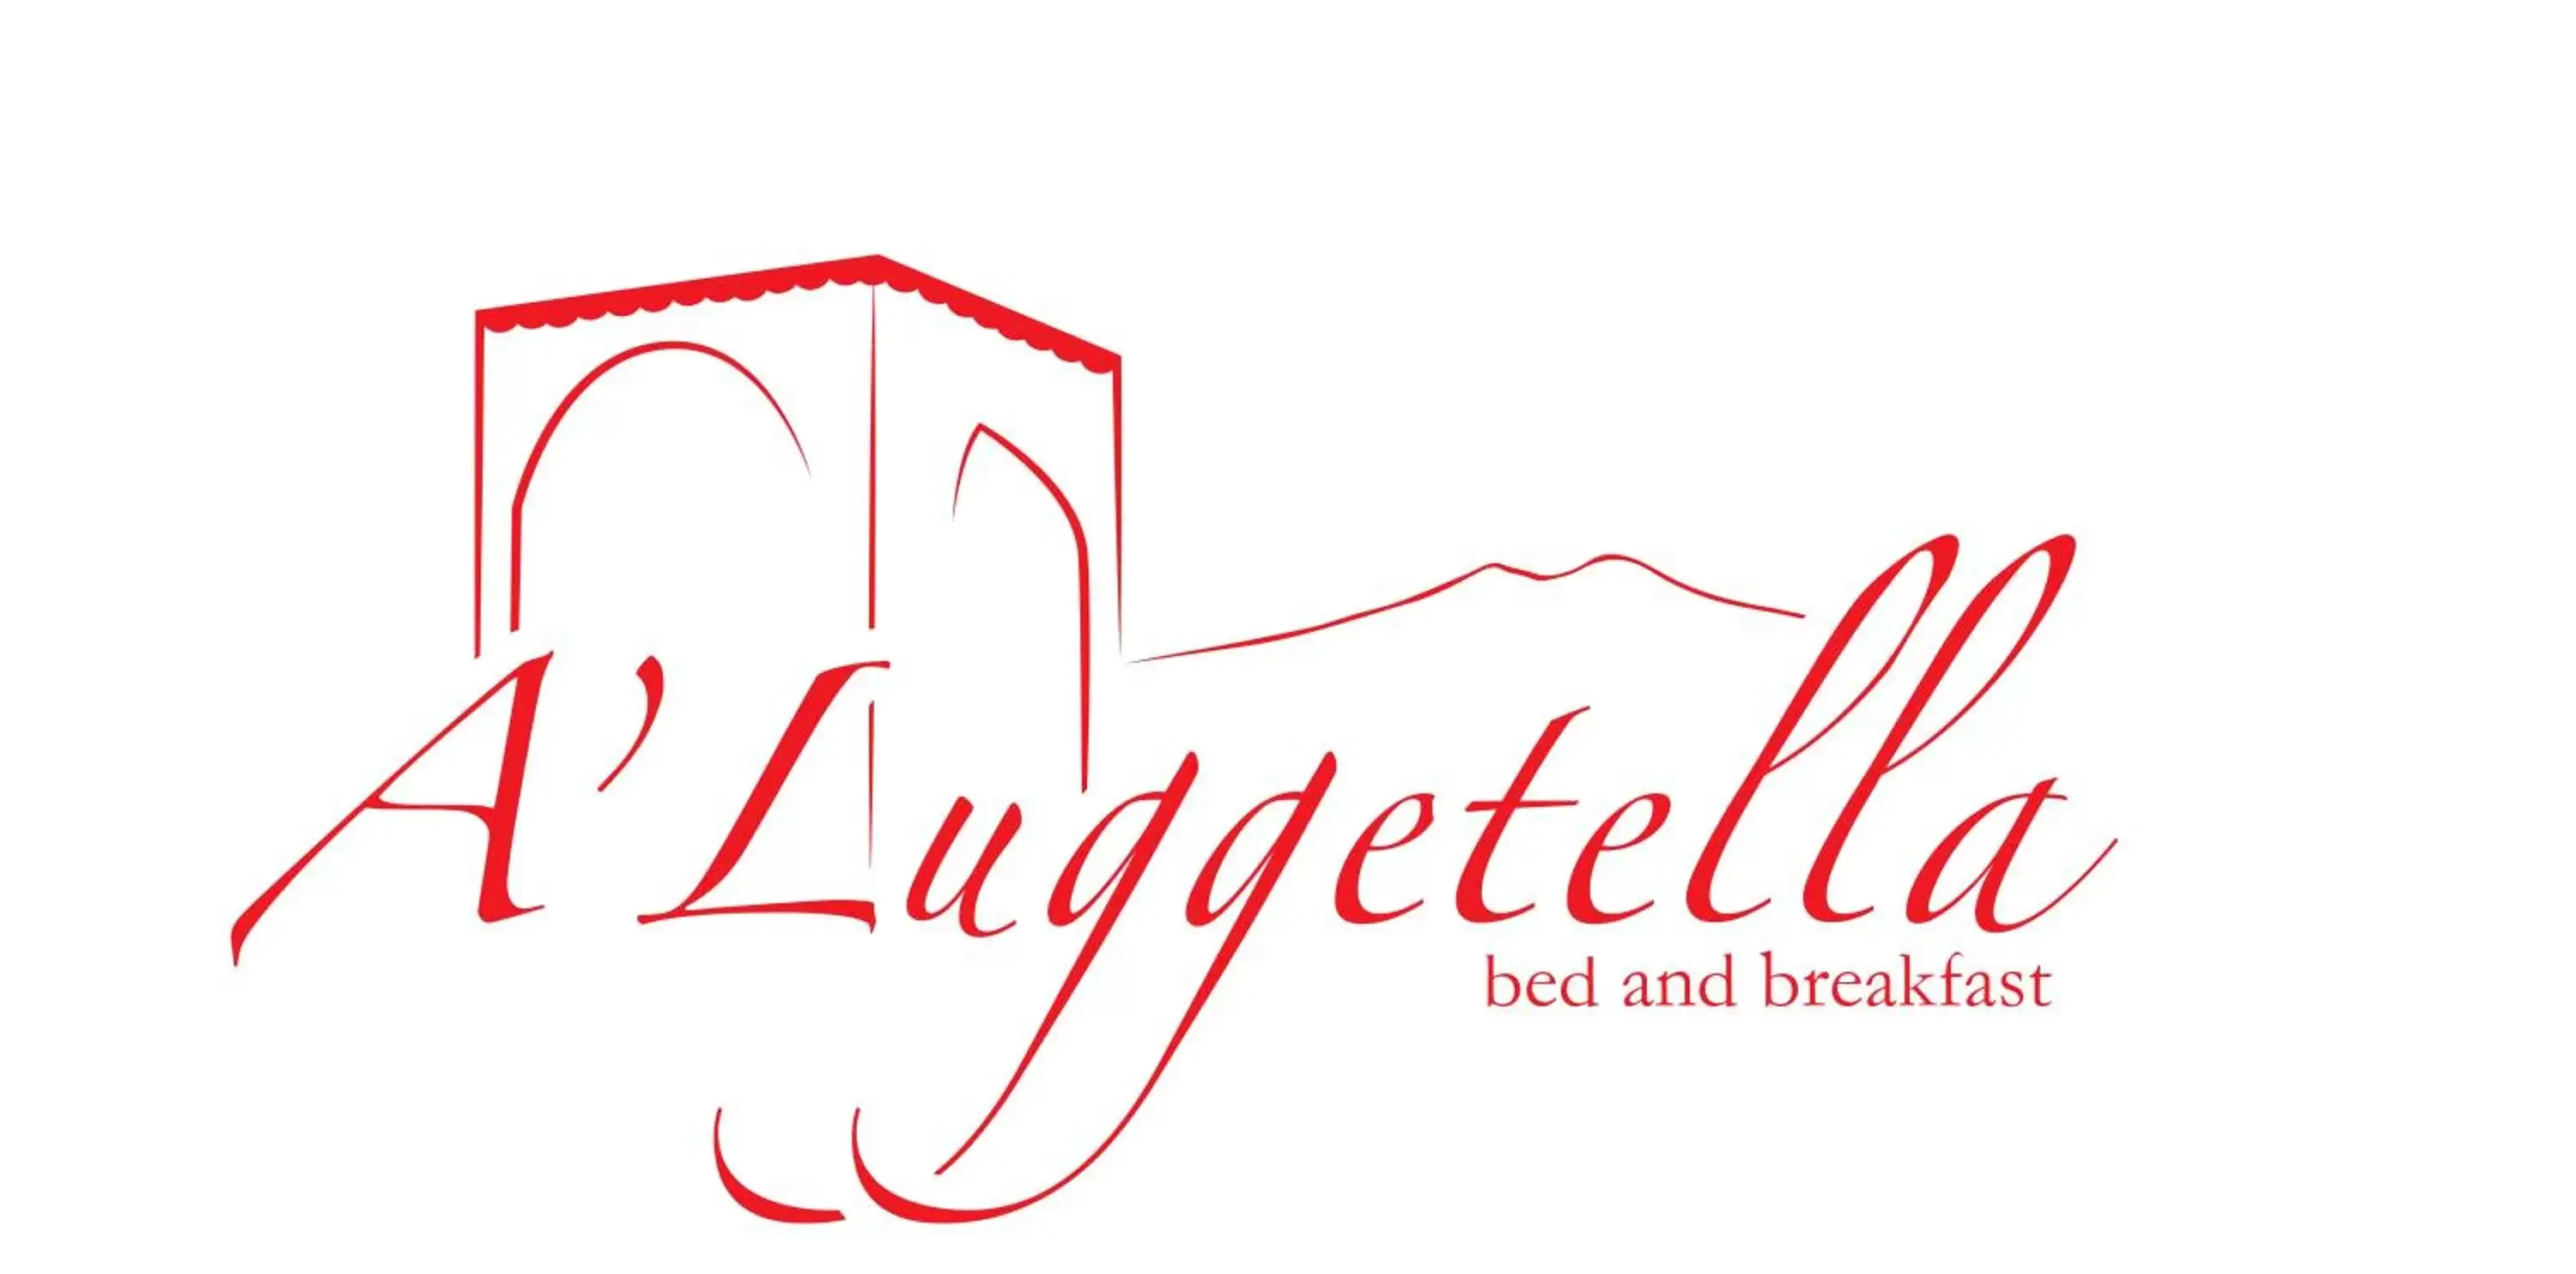 Property logo or sign, Property Logo/Sign in A'Luggetella